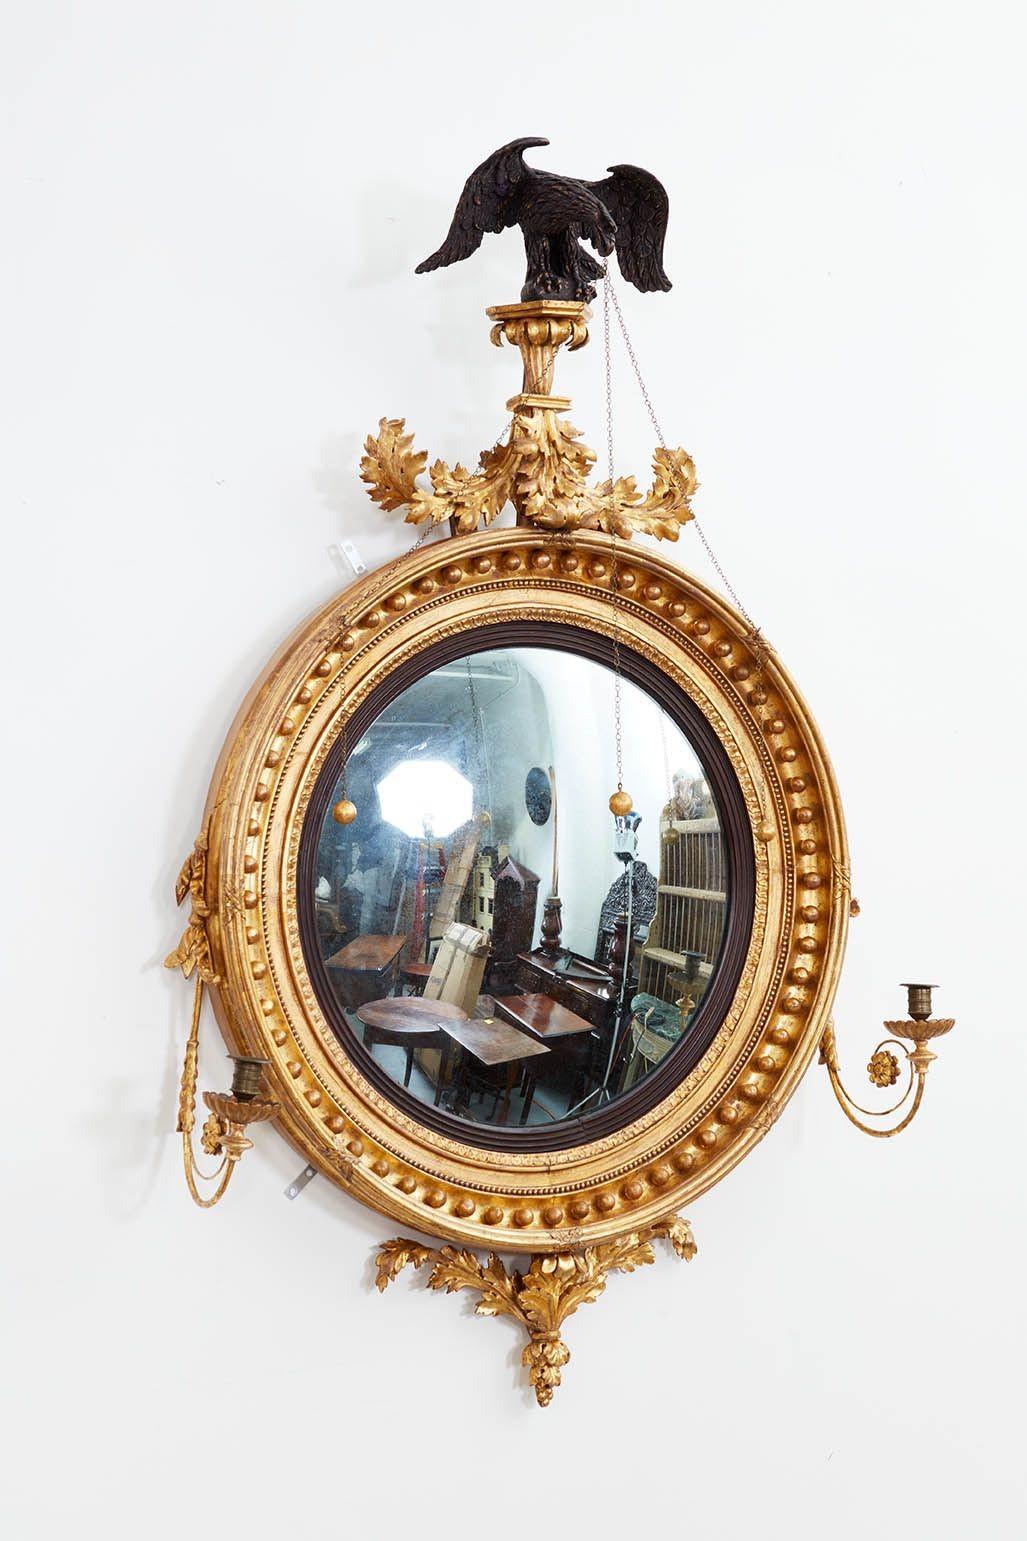 English Regency bullseye mirror of exceptional quality and important scale, circa 1820. Surrounded by spheres and surmounted by a particularly well-executed ebonized eagle, and bordered by brass candle sconce arms. With original mercury glass. The